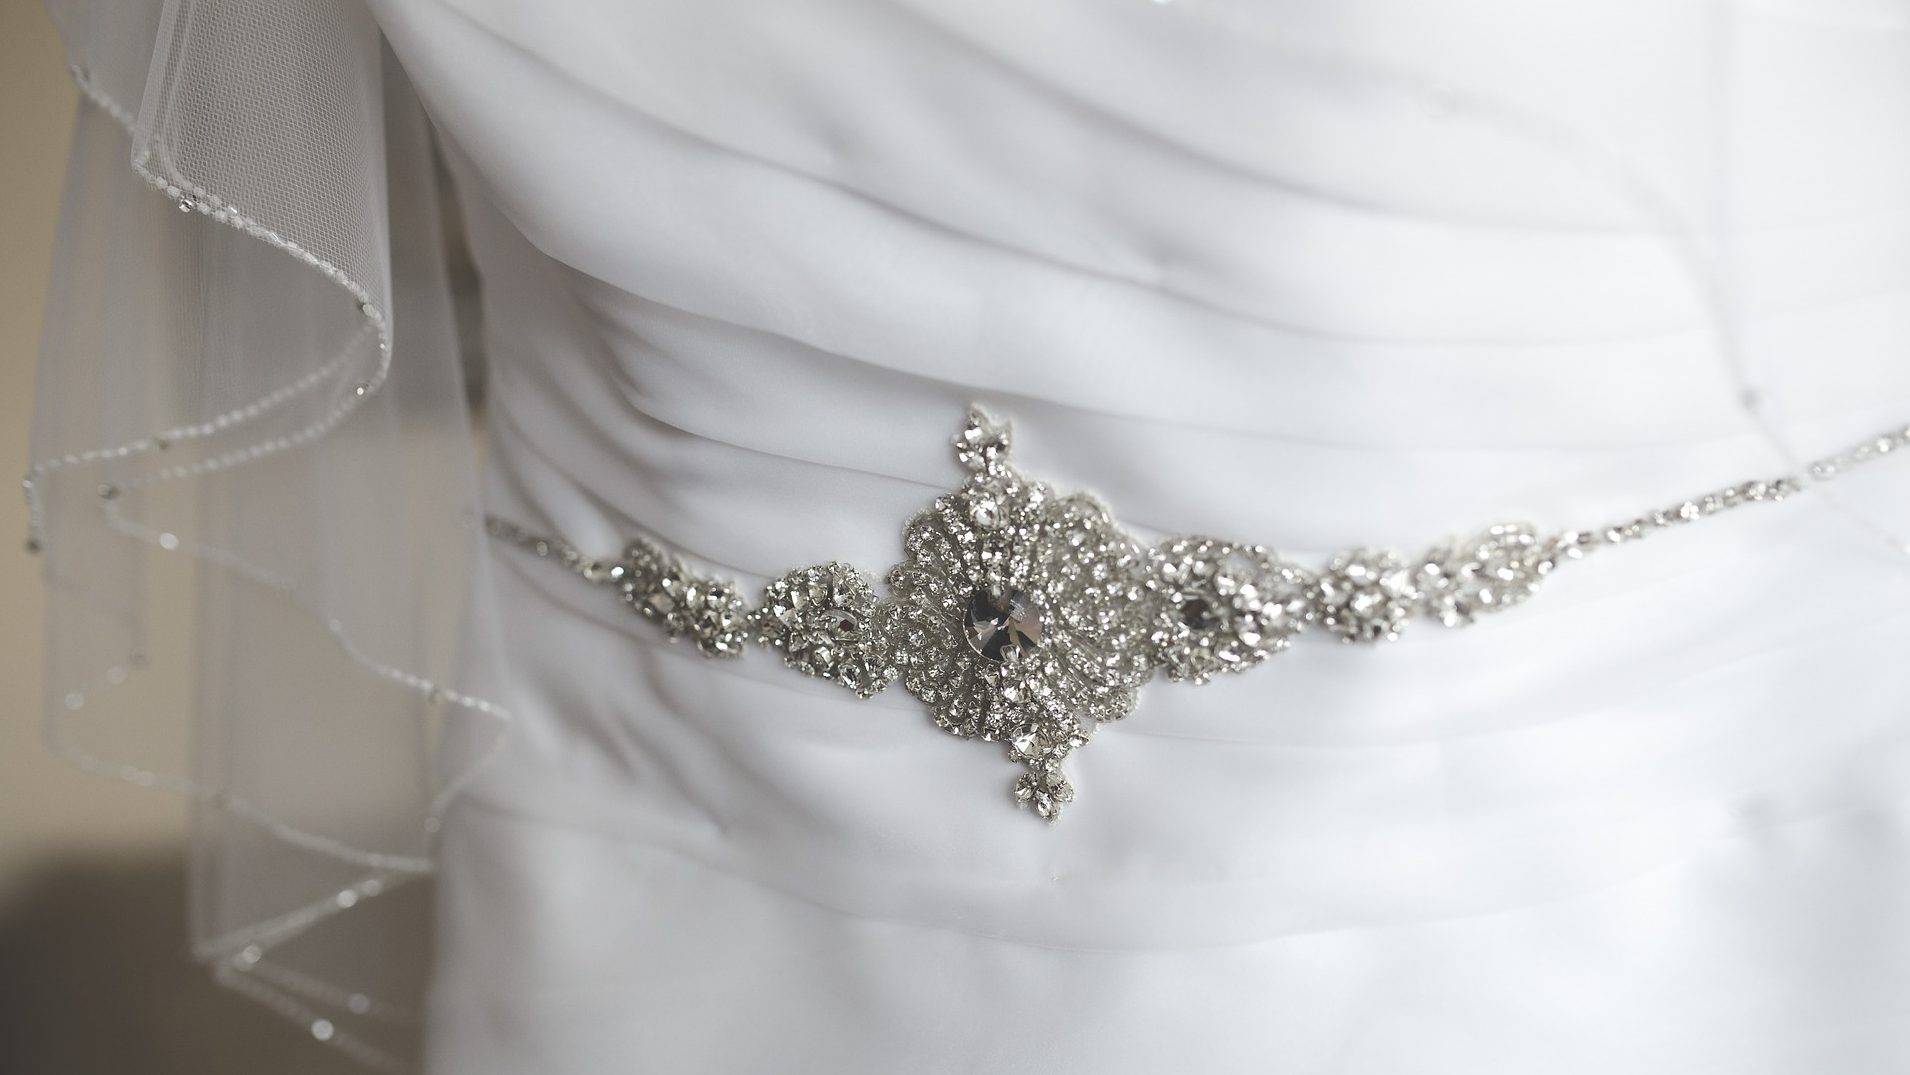 5 Simple Tips for Upstyling Your Wedding Dress